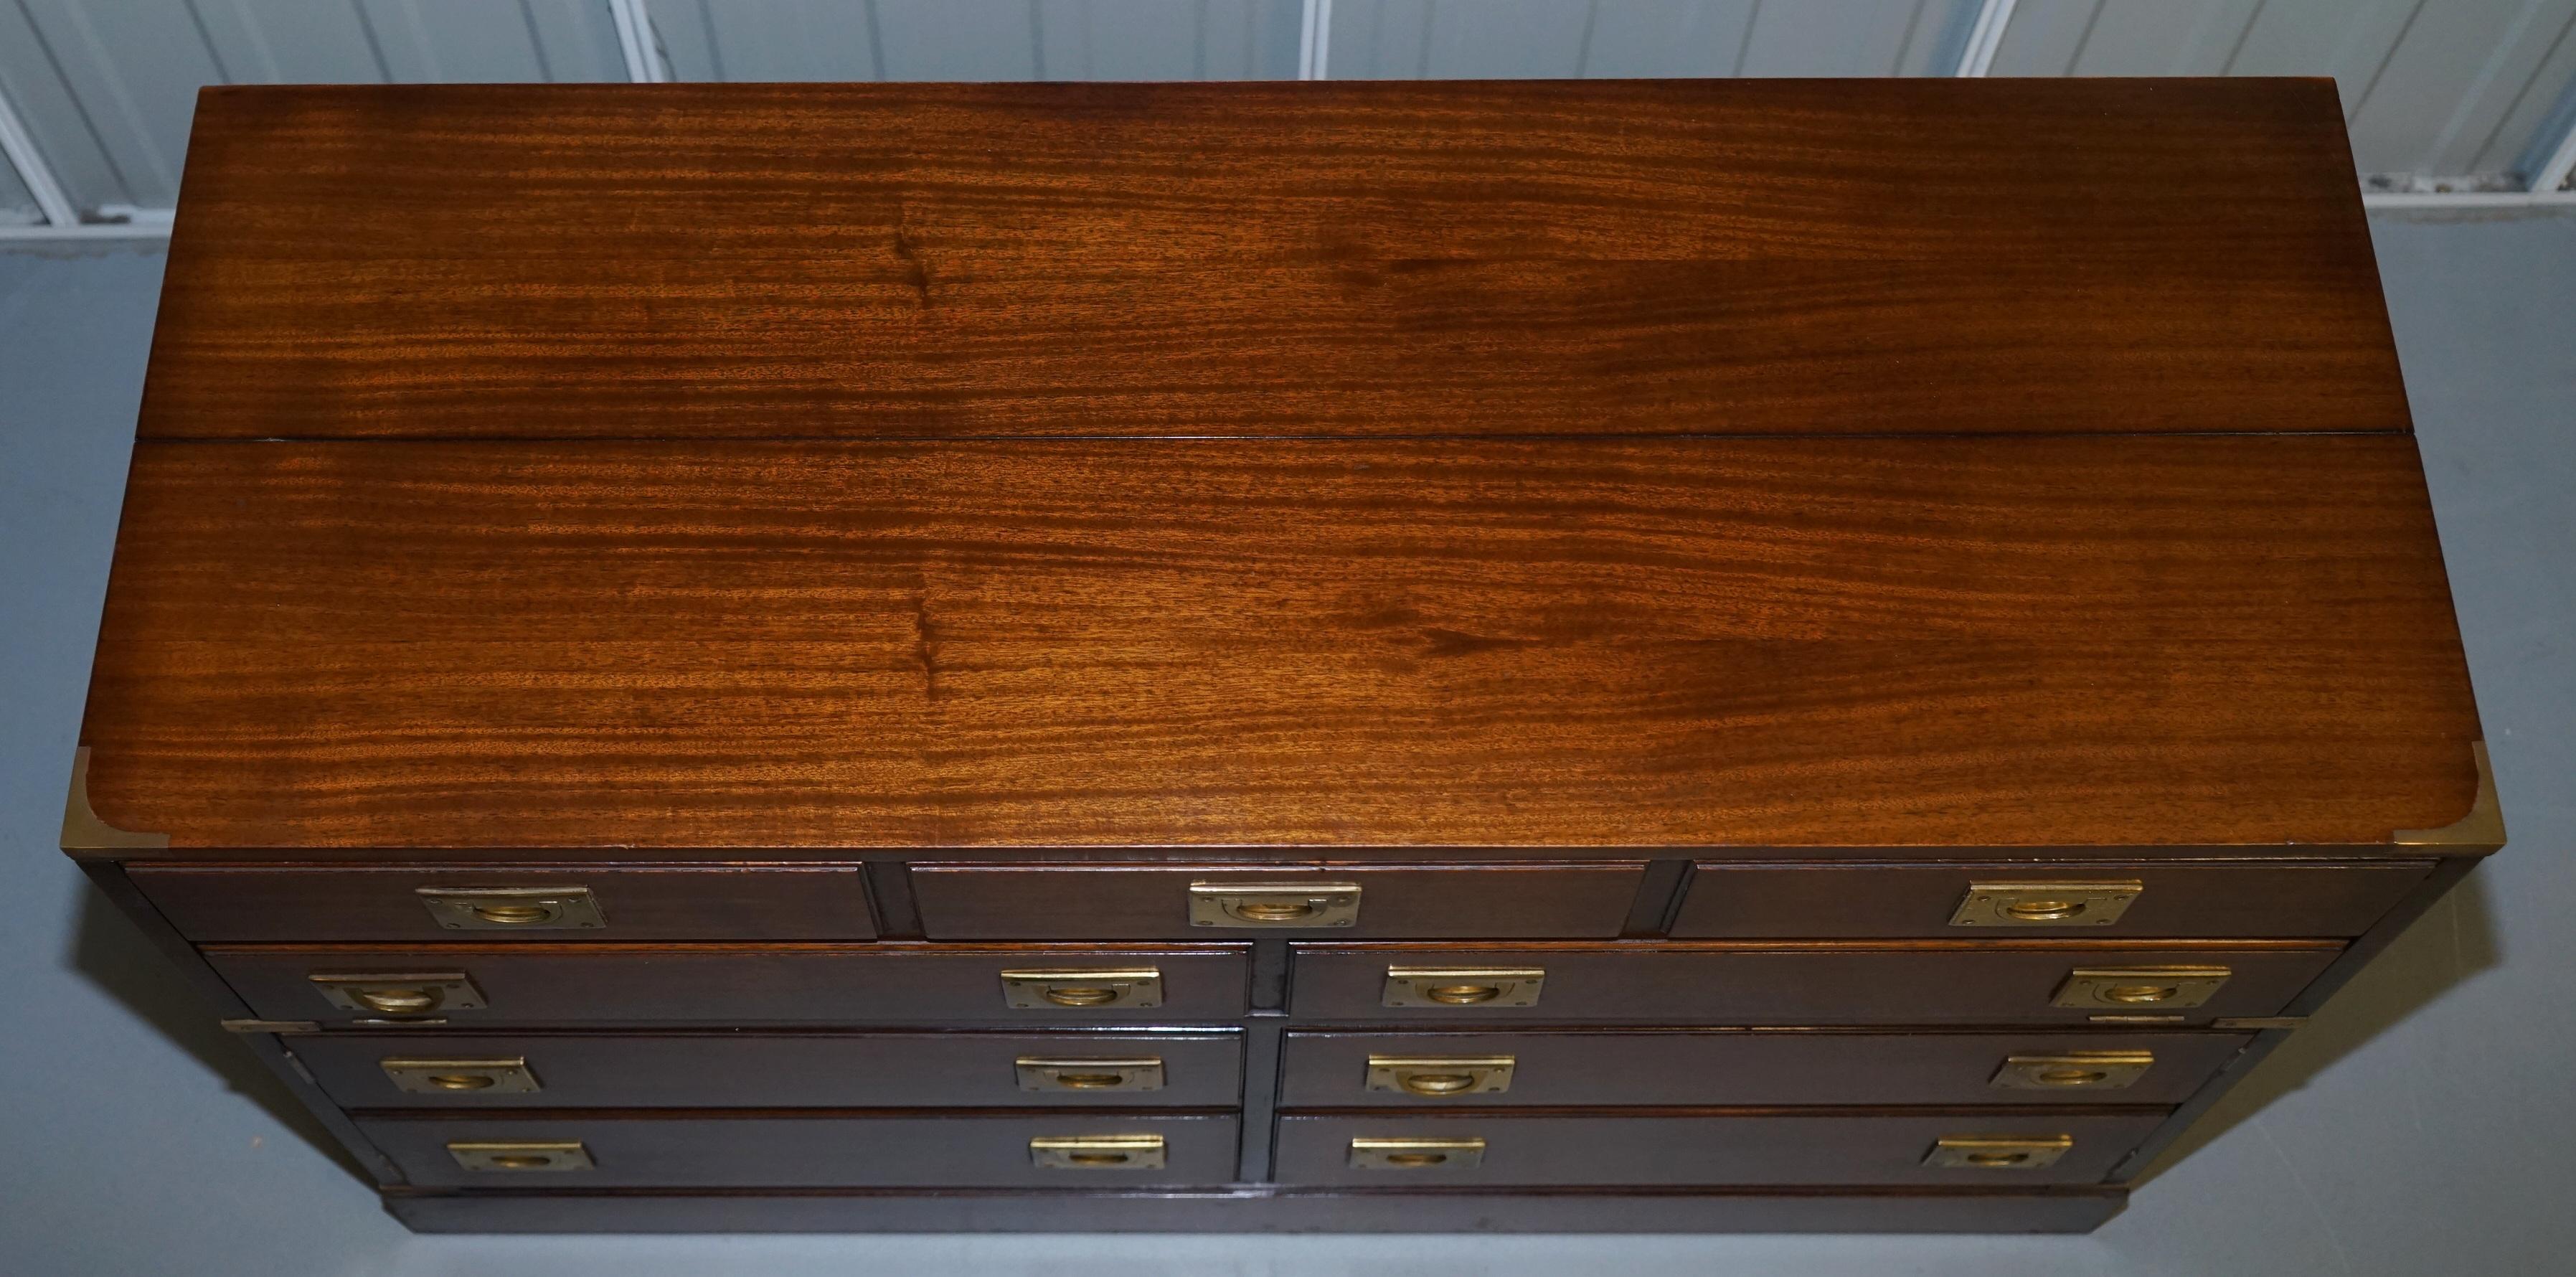 Mahogany RECORD PLAYER CABINET HIDDEN INSIDE MILITARY CAMPAIGN CHEST CHEST OF DRAWERs